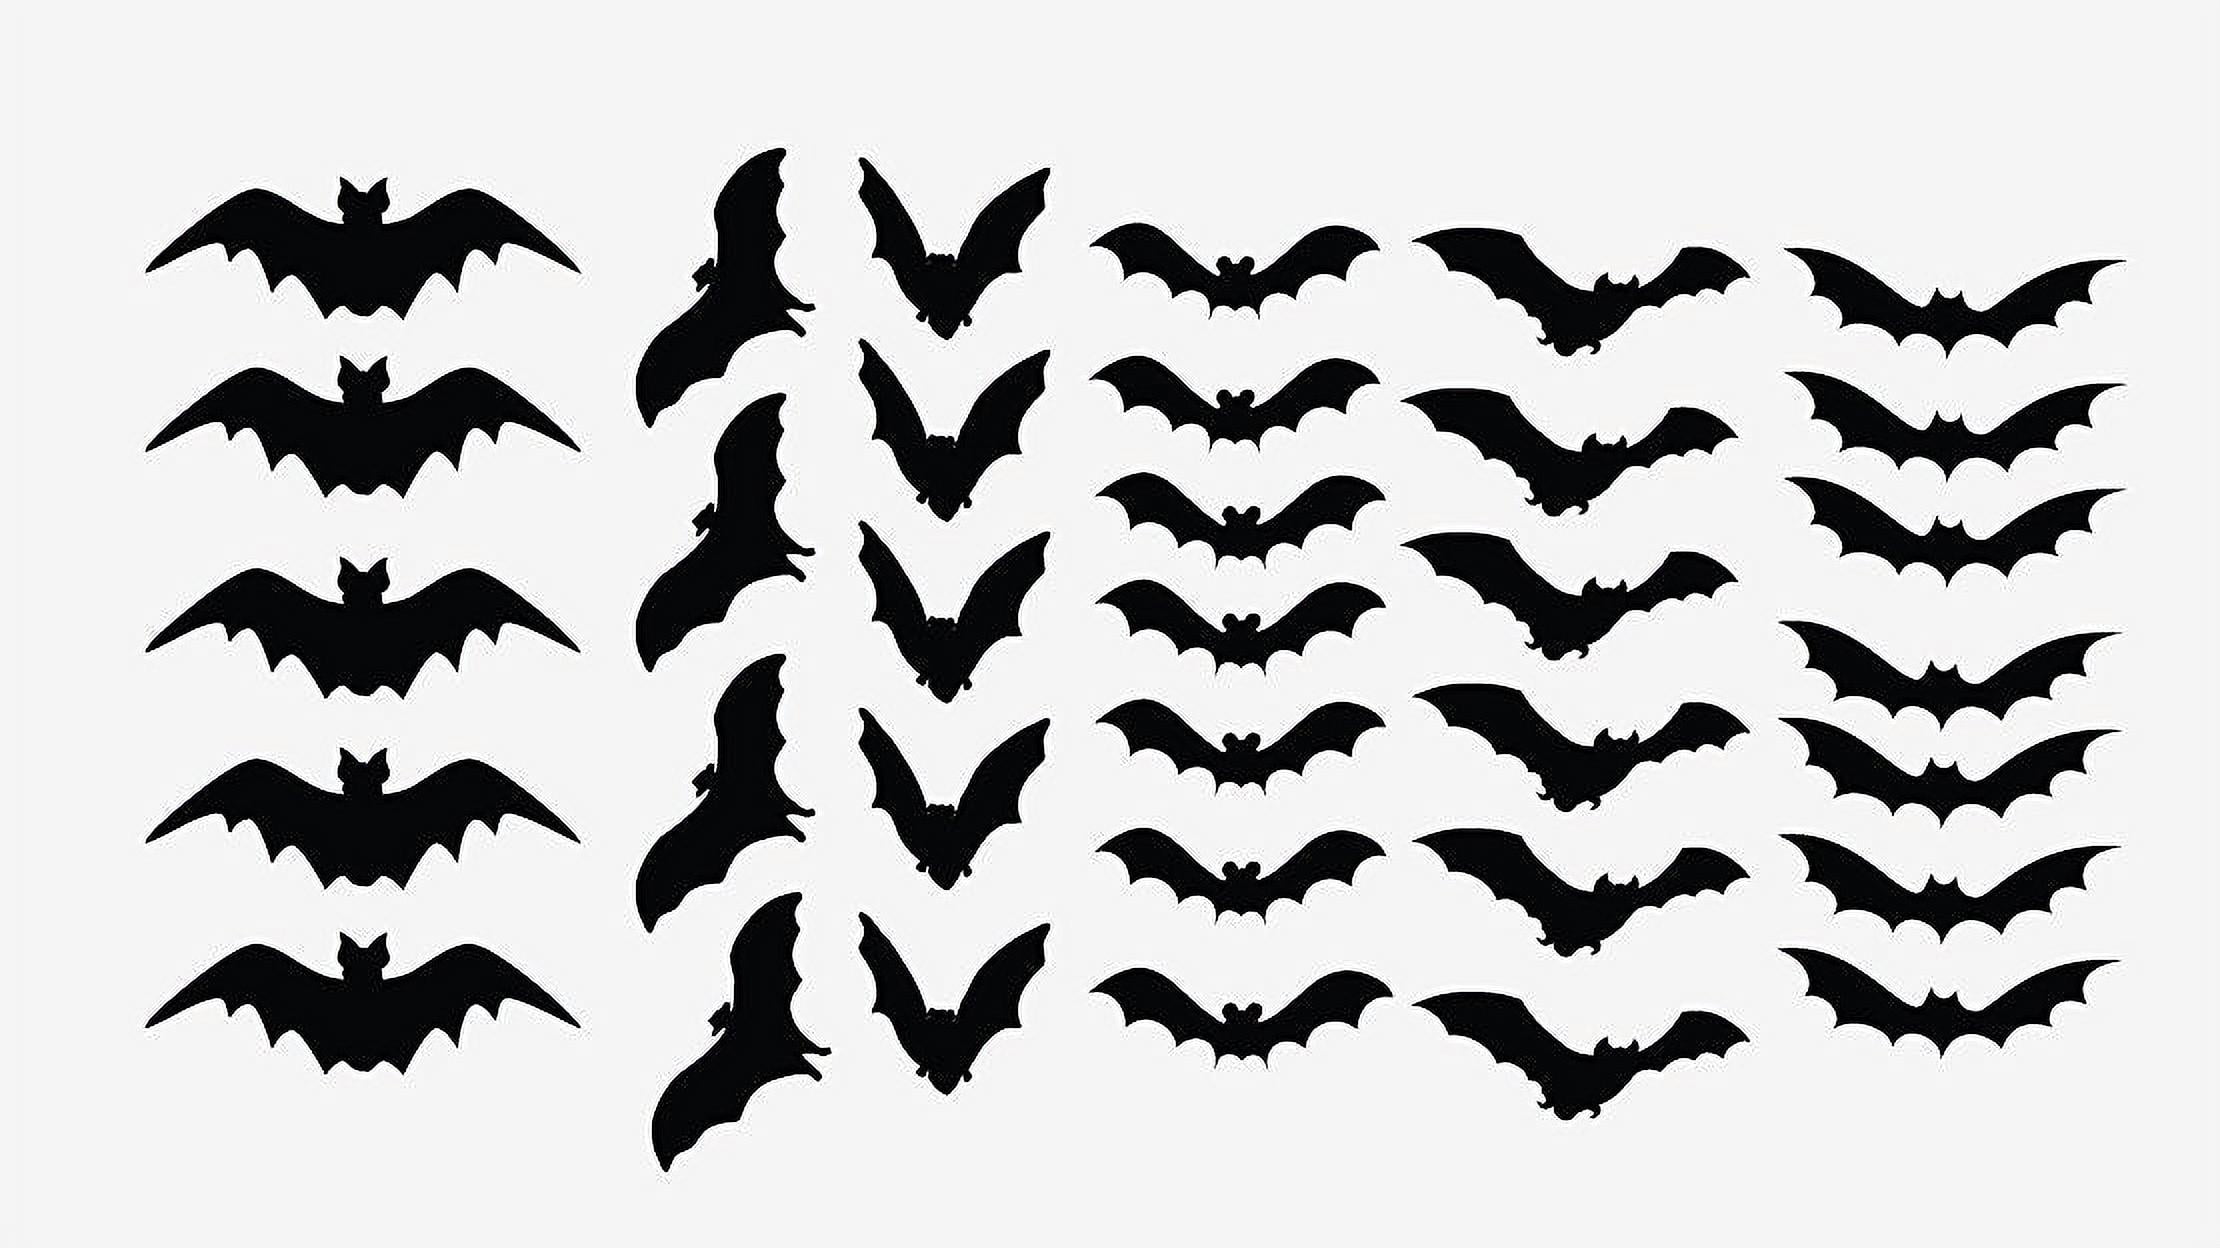 Nonadhesive Self-Static Scary Spider Web Window Stickers for Holiday Halloween Party Haunted House Decorations Supplies Favors PAMASE 226 Pieces Black Bats Spiderwebs Window Clings Decals Stickers 